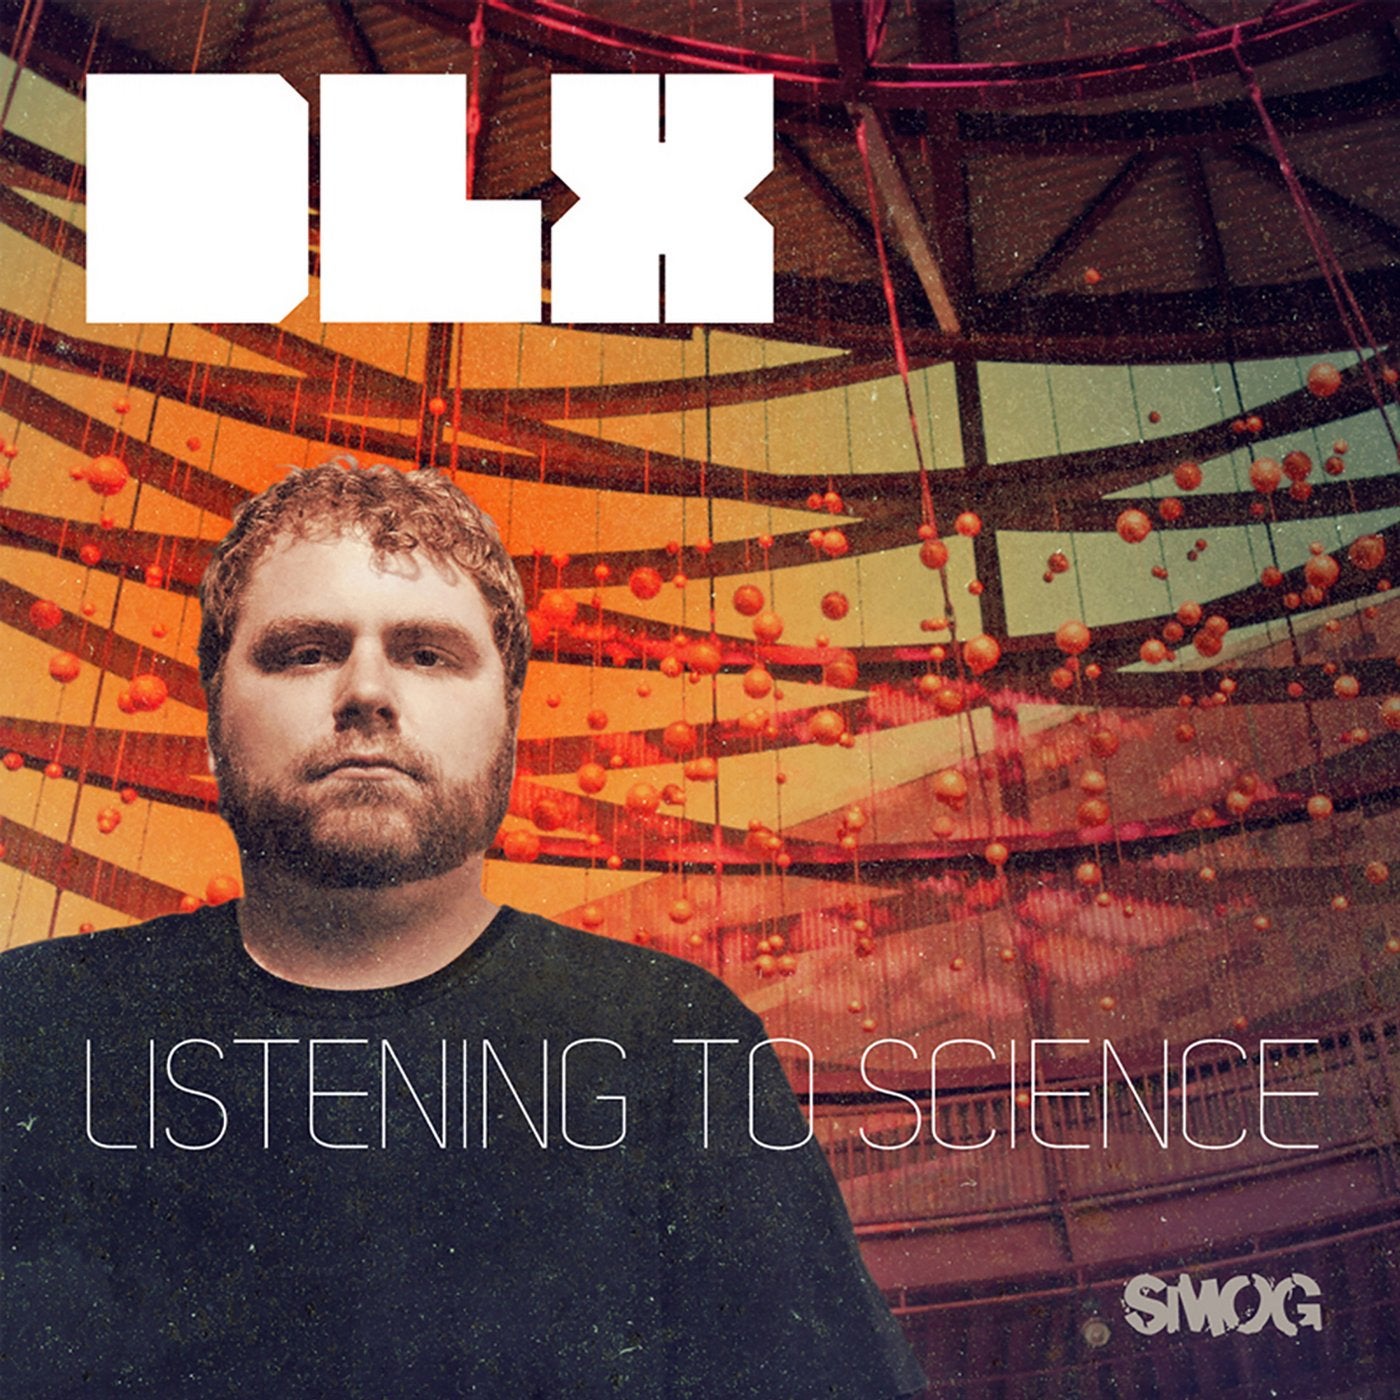 Listening to Science